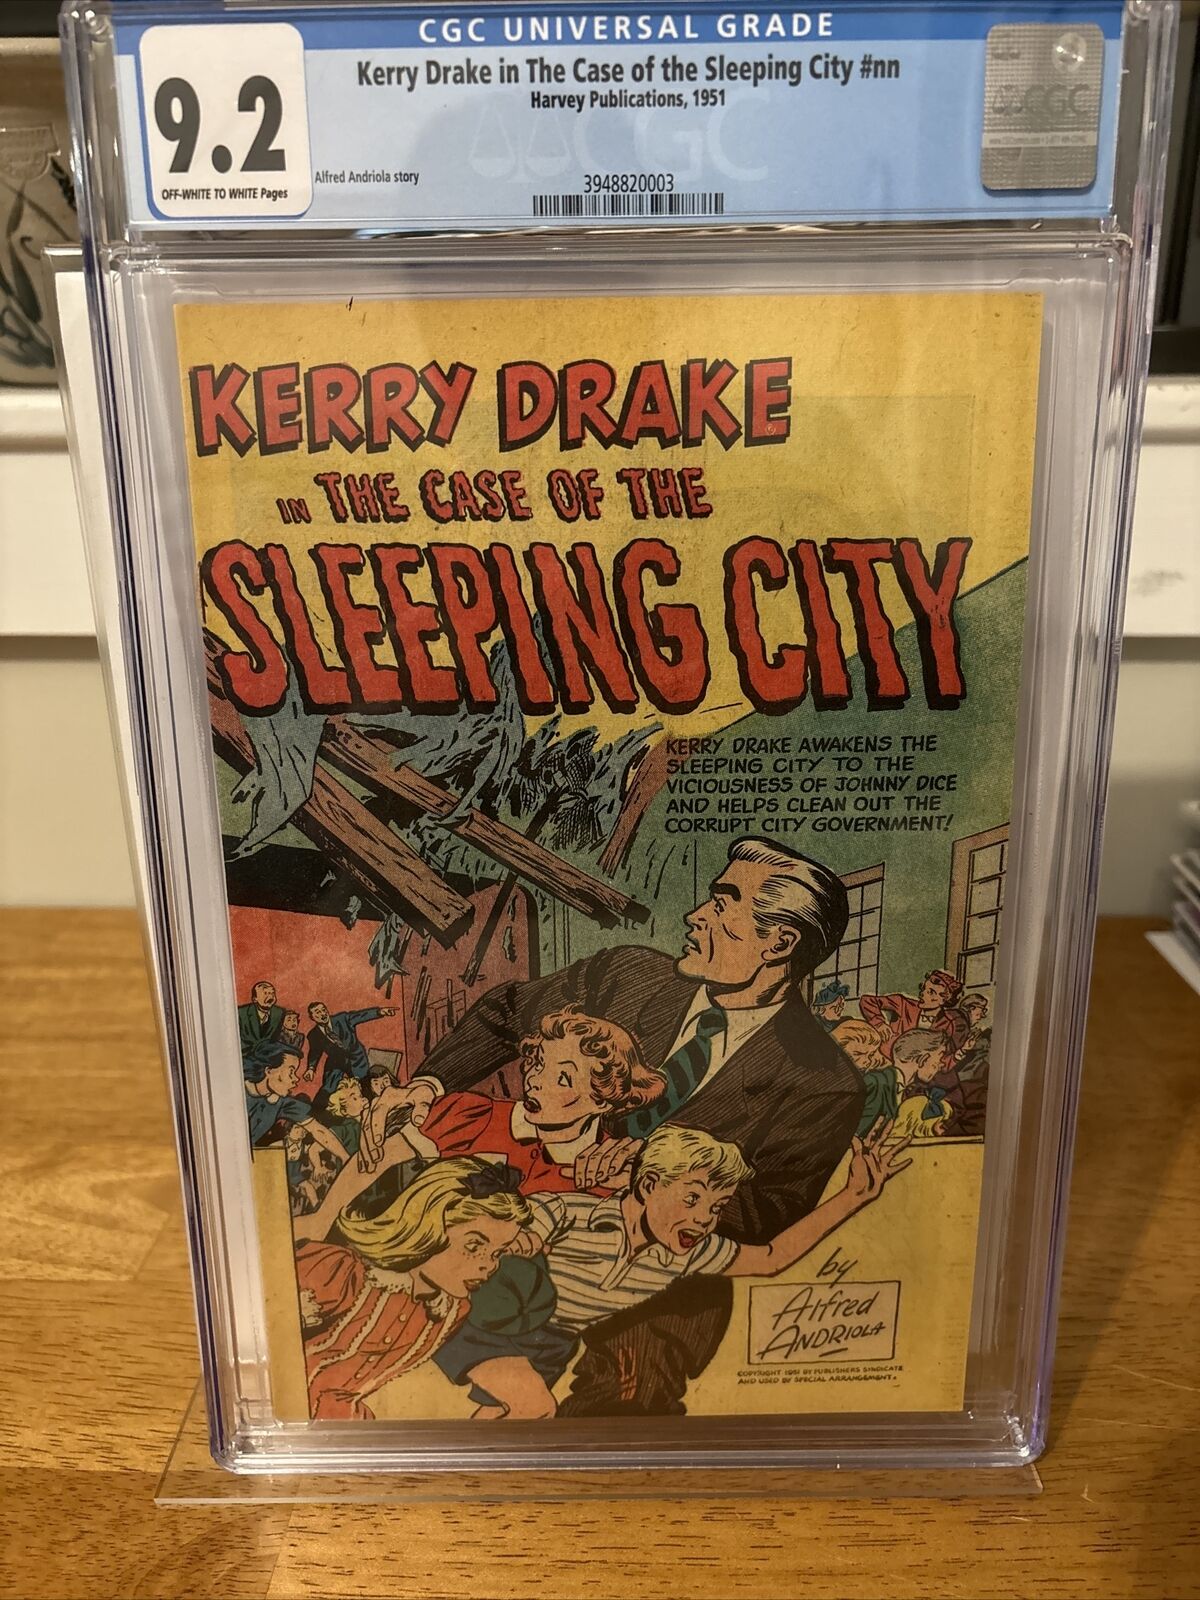 KERRY DRAKE IN CASE OF THE SLEEPING CITY #NN CGC 9.2 OW/W (1951) VHTF